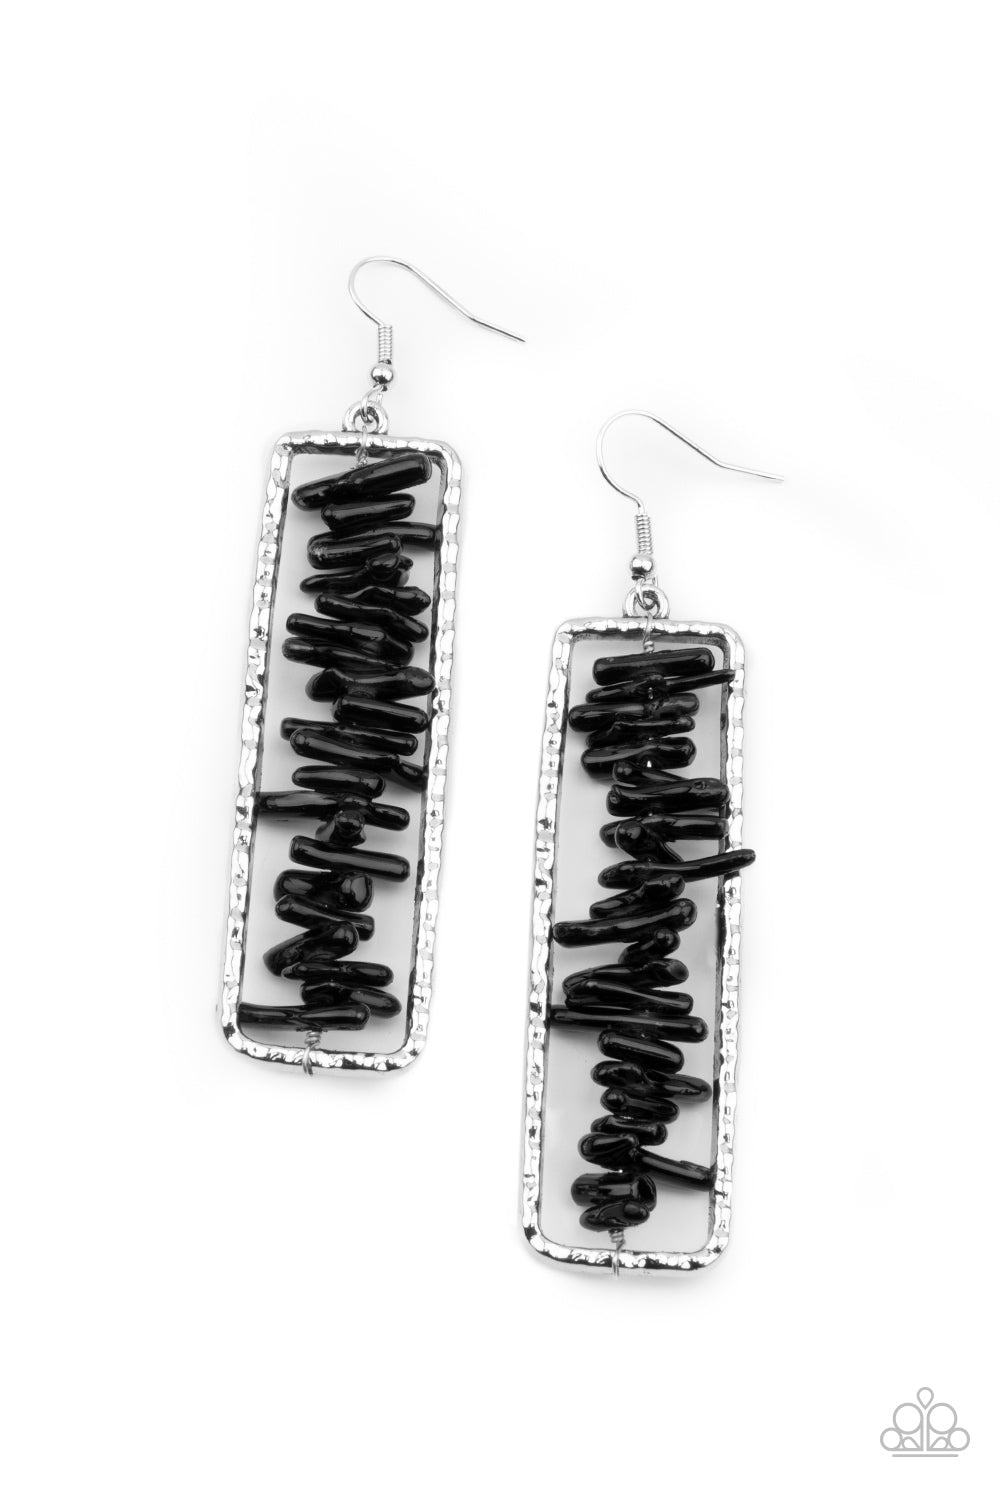 Don't QUARRY, Be Happy - Black Stone Earrings bits of black rock are threaded along a metal rod inside a hammered silver rectangle, creating an earthy frame. Earring attaches to a standard fishhook fitting.  Sold as one pair of earrings.  Paparazzi Jewelry is lead and nickel free so it's perfect for sensitive skin too!